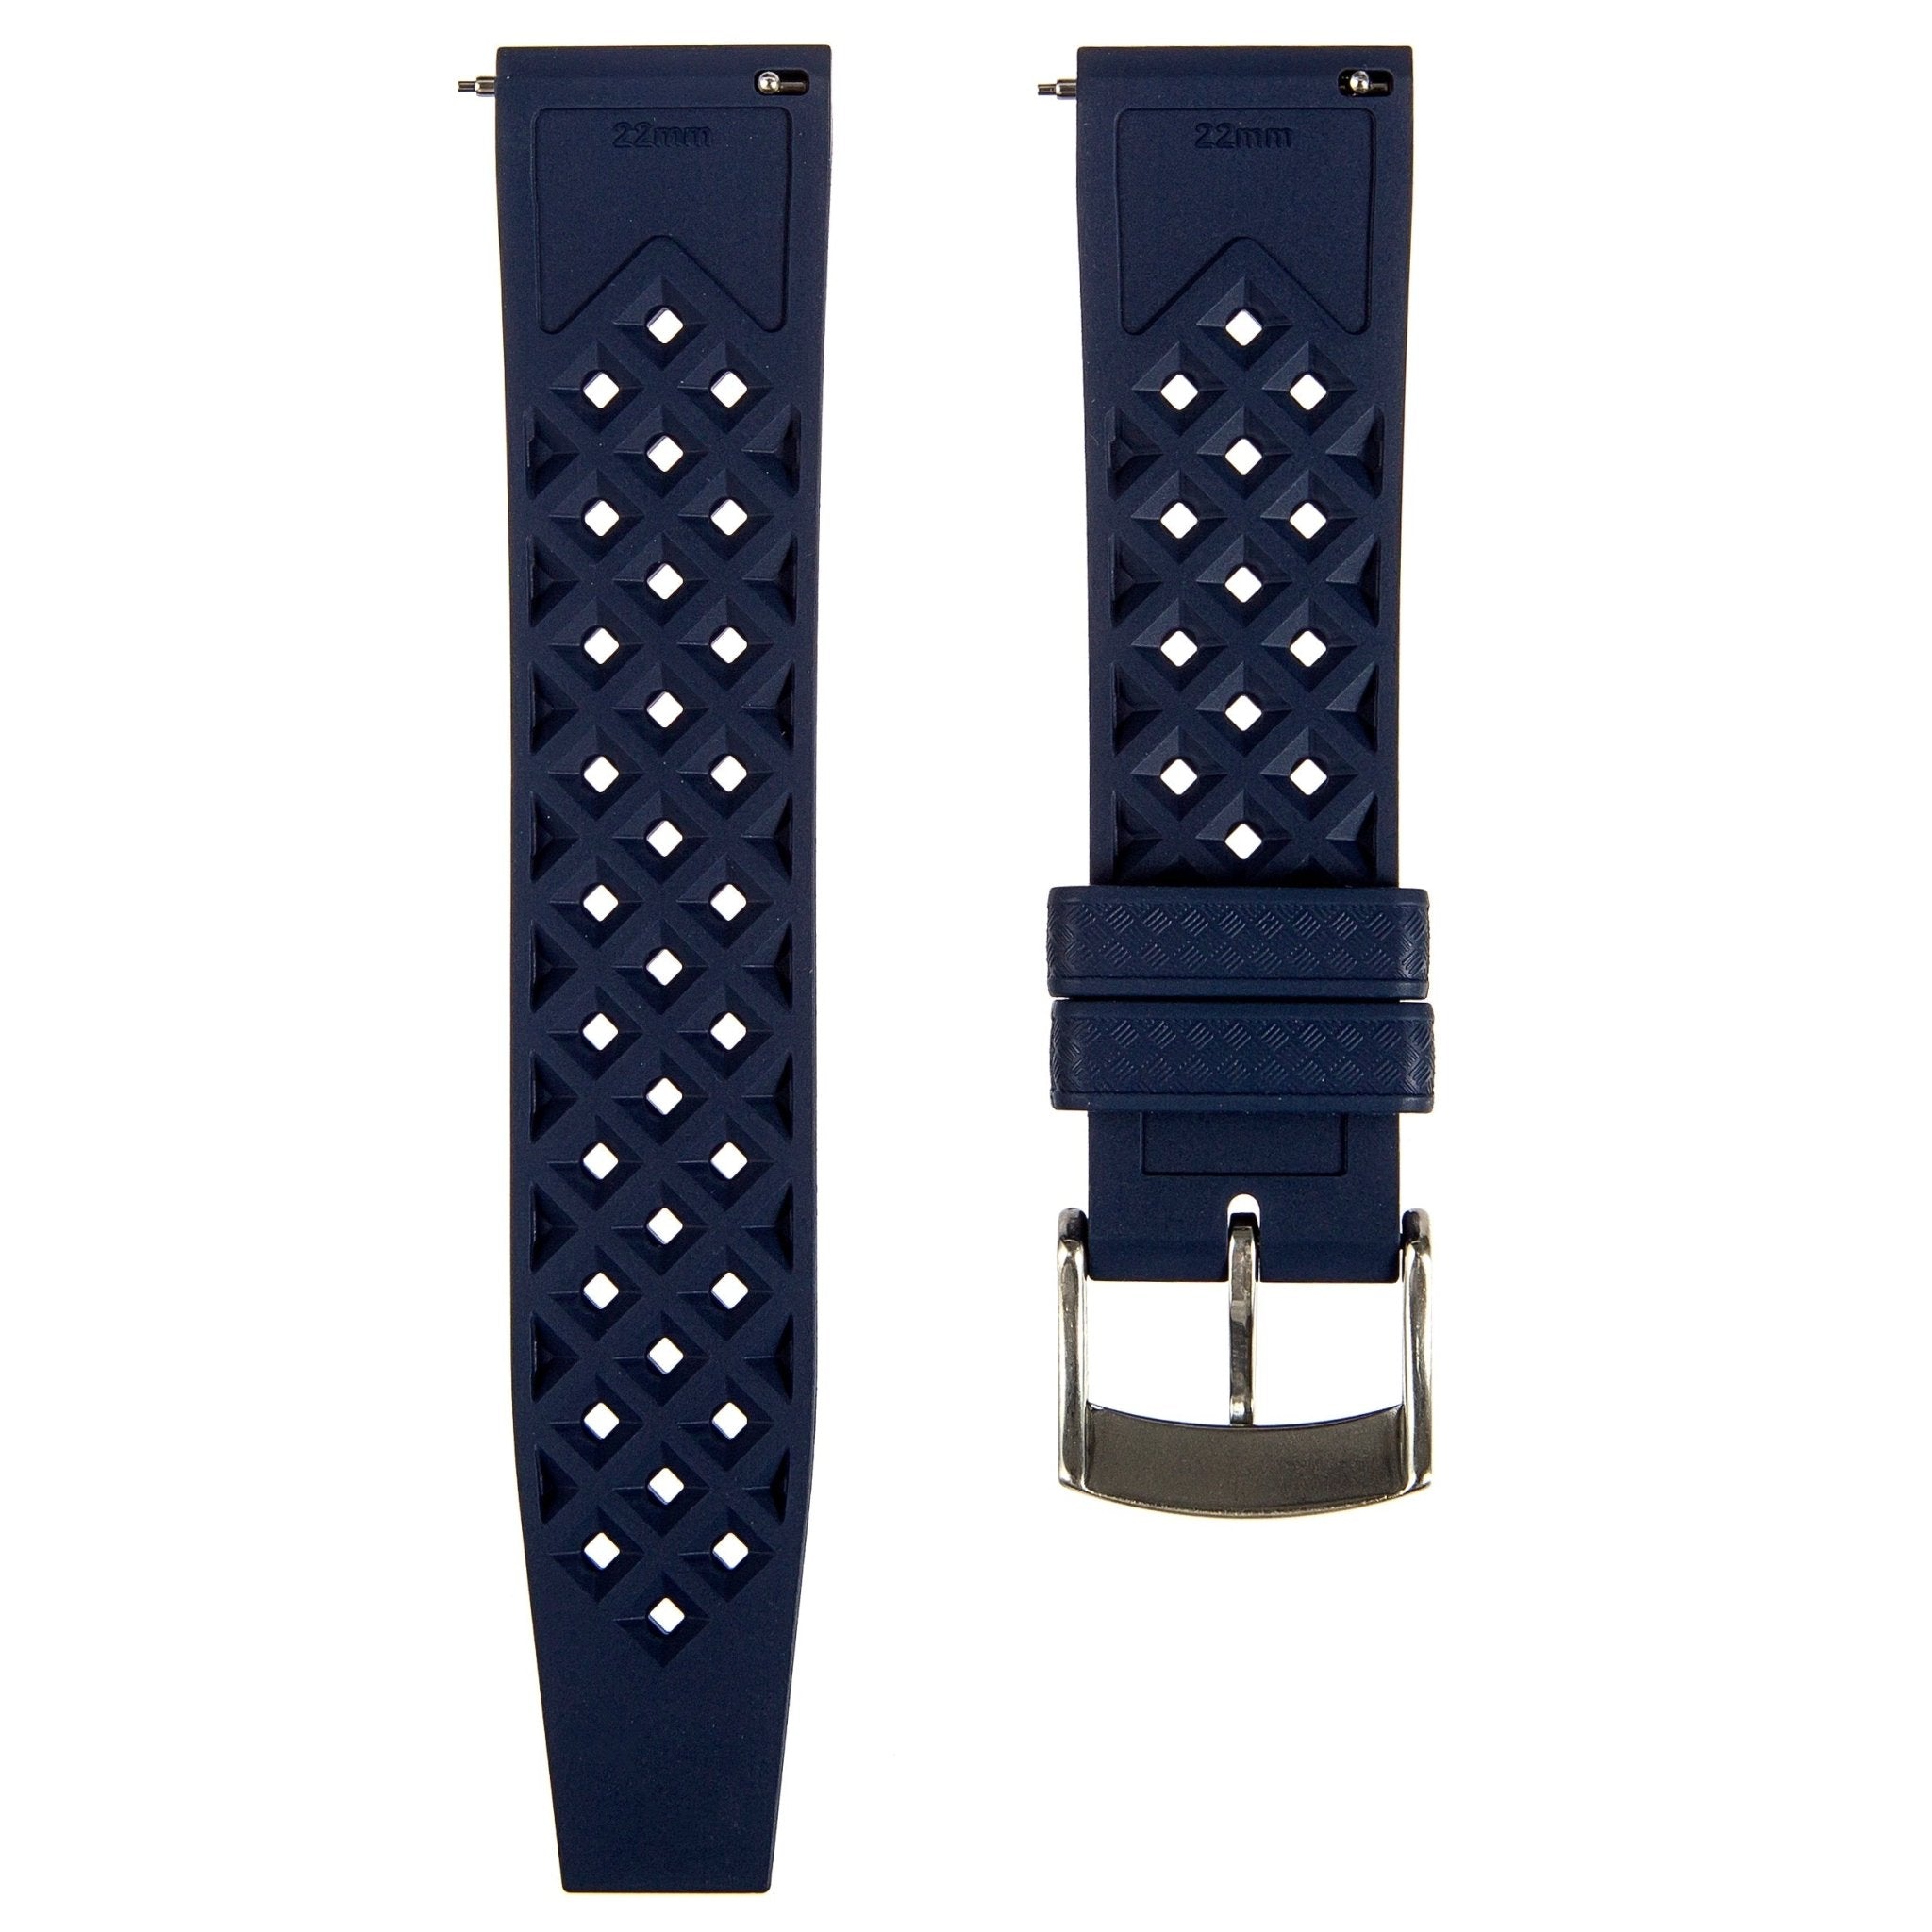 Calypso Tropical Style FKM Rubber Strap- Quick-Release-Compatible with Omega x Swatch - Navy (2422) -Strapseeker